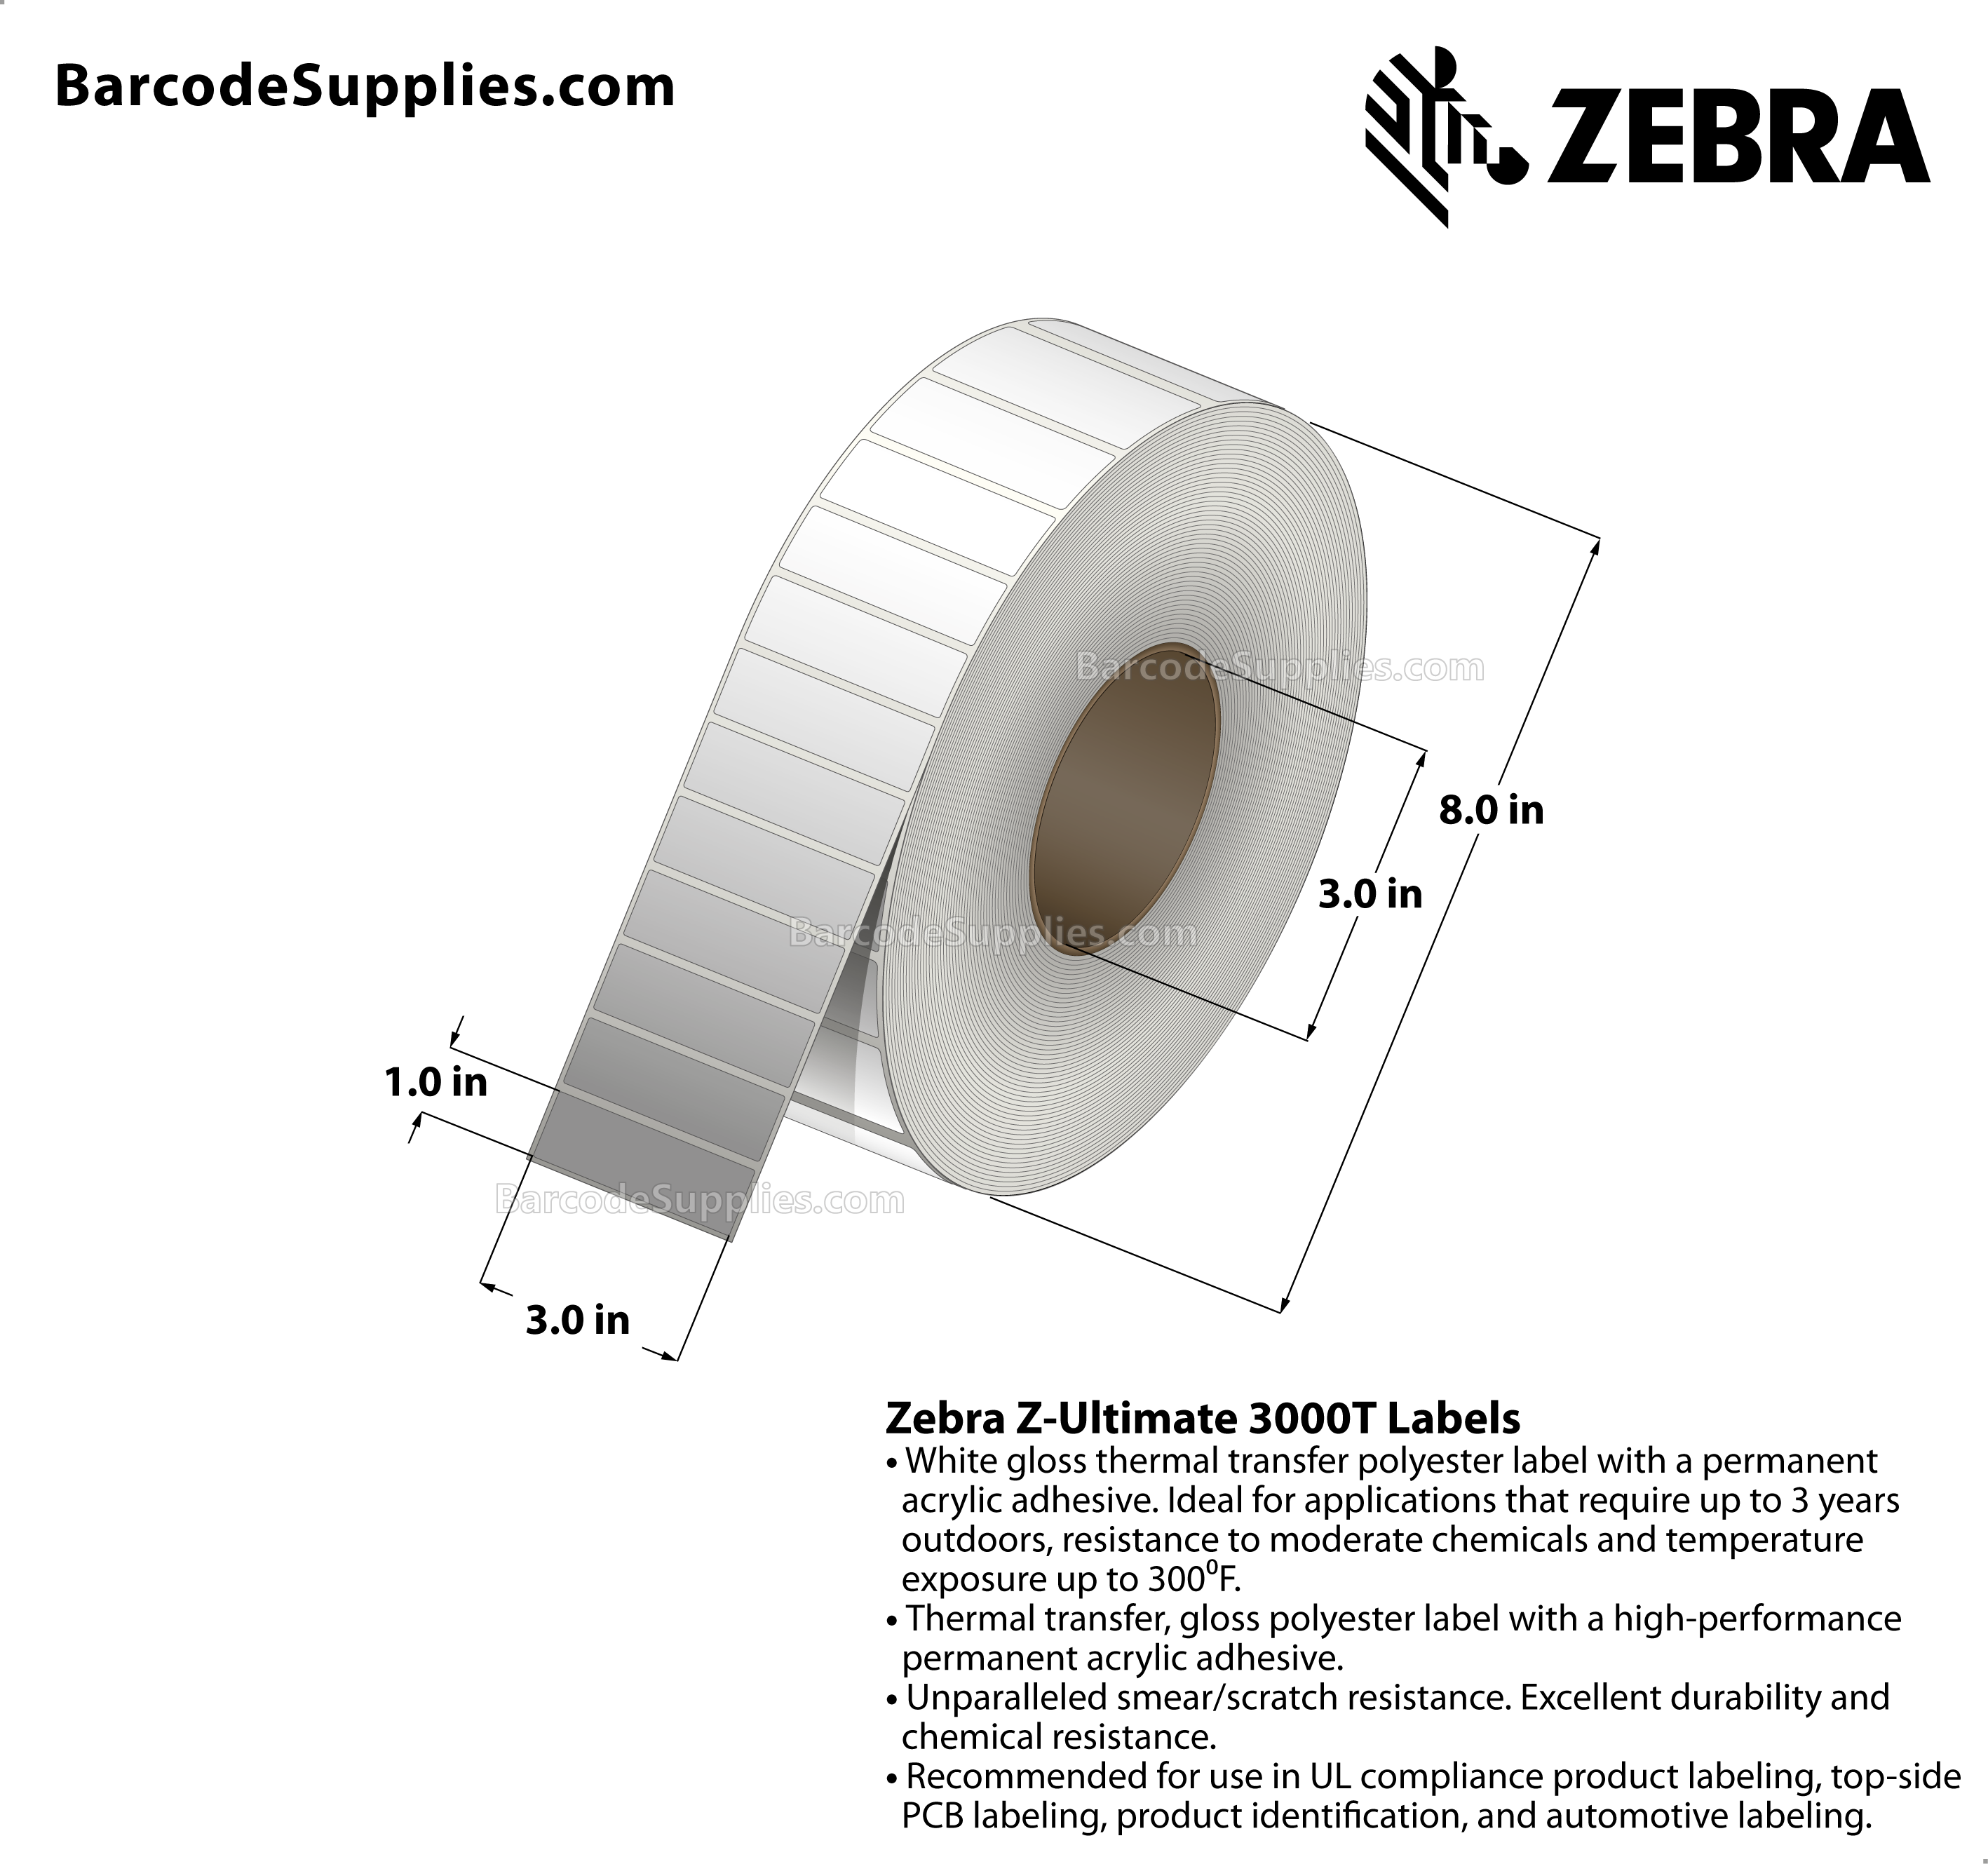 3 x 1 Thermal Transfer White Z-Ultimate 3000T Labels With Permanent Adhesive - Not Perforated - 5240 Labels Per Roll - Carton Of 4 Rolls - 20960 Labels Total - MPN: 10011702